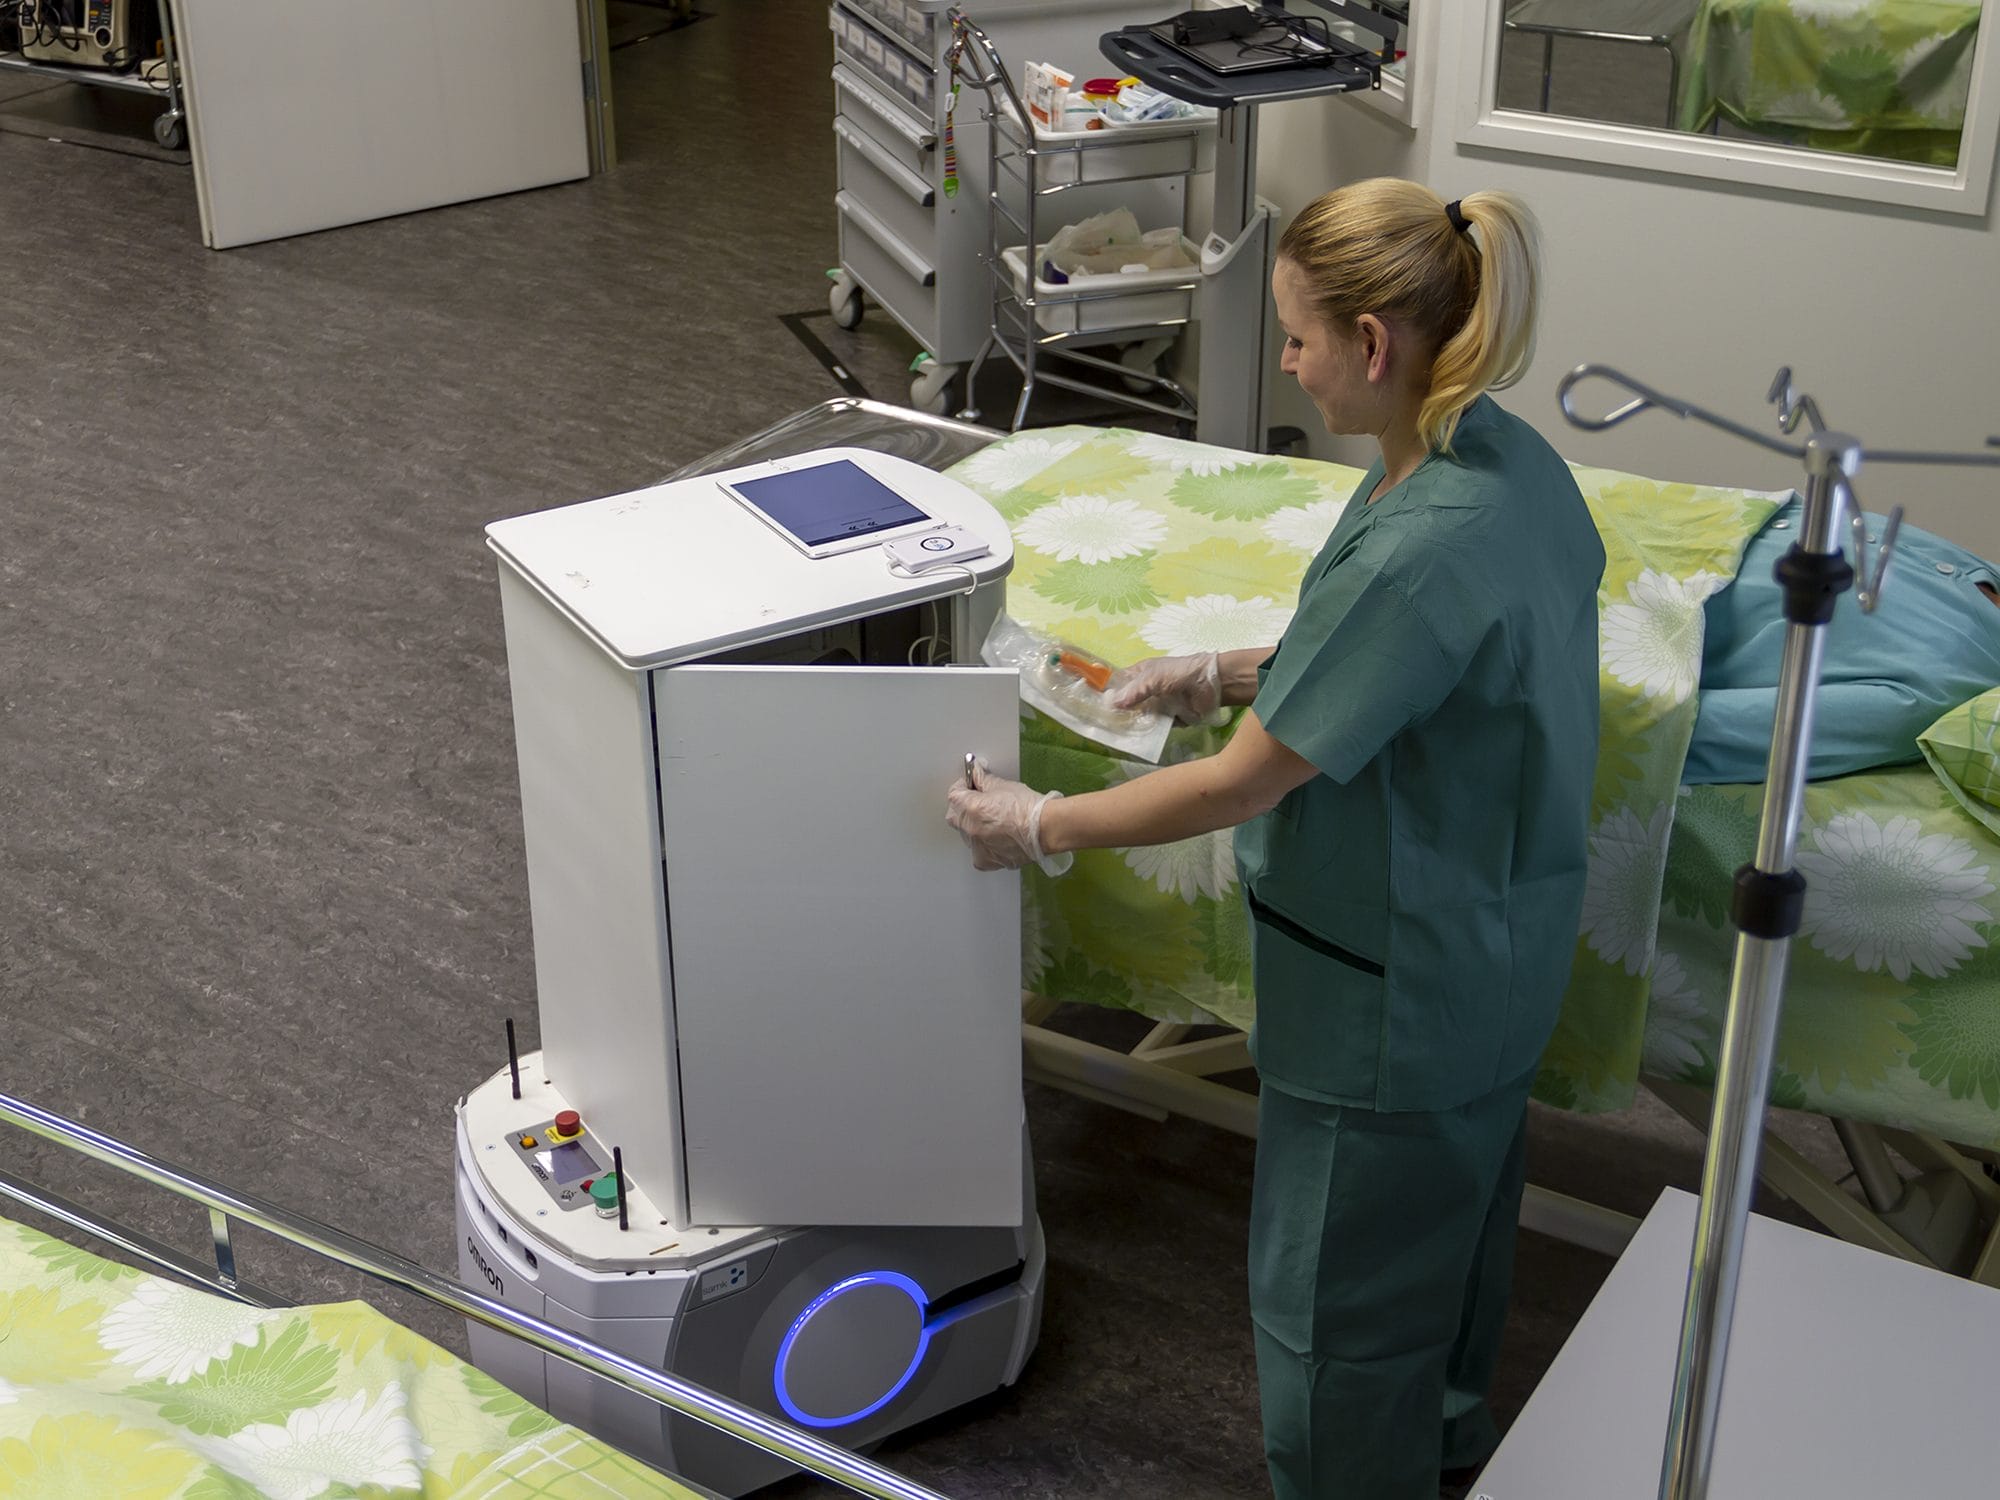 A mobile robot assists the nurse in her work.